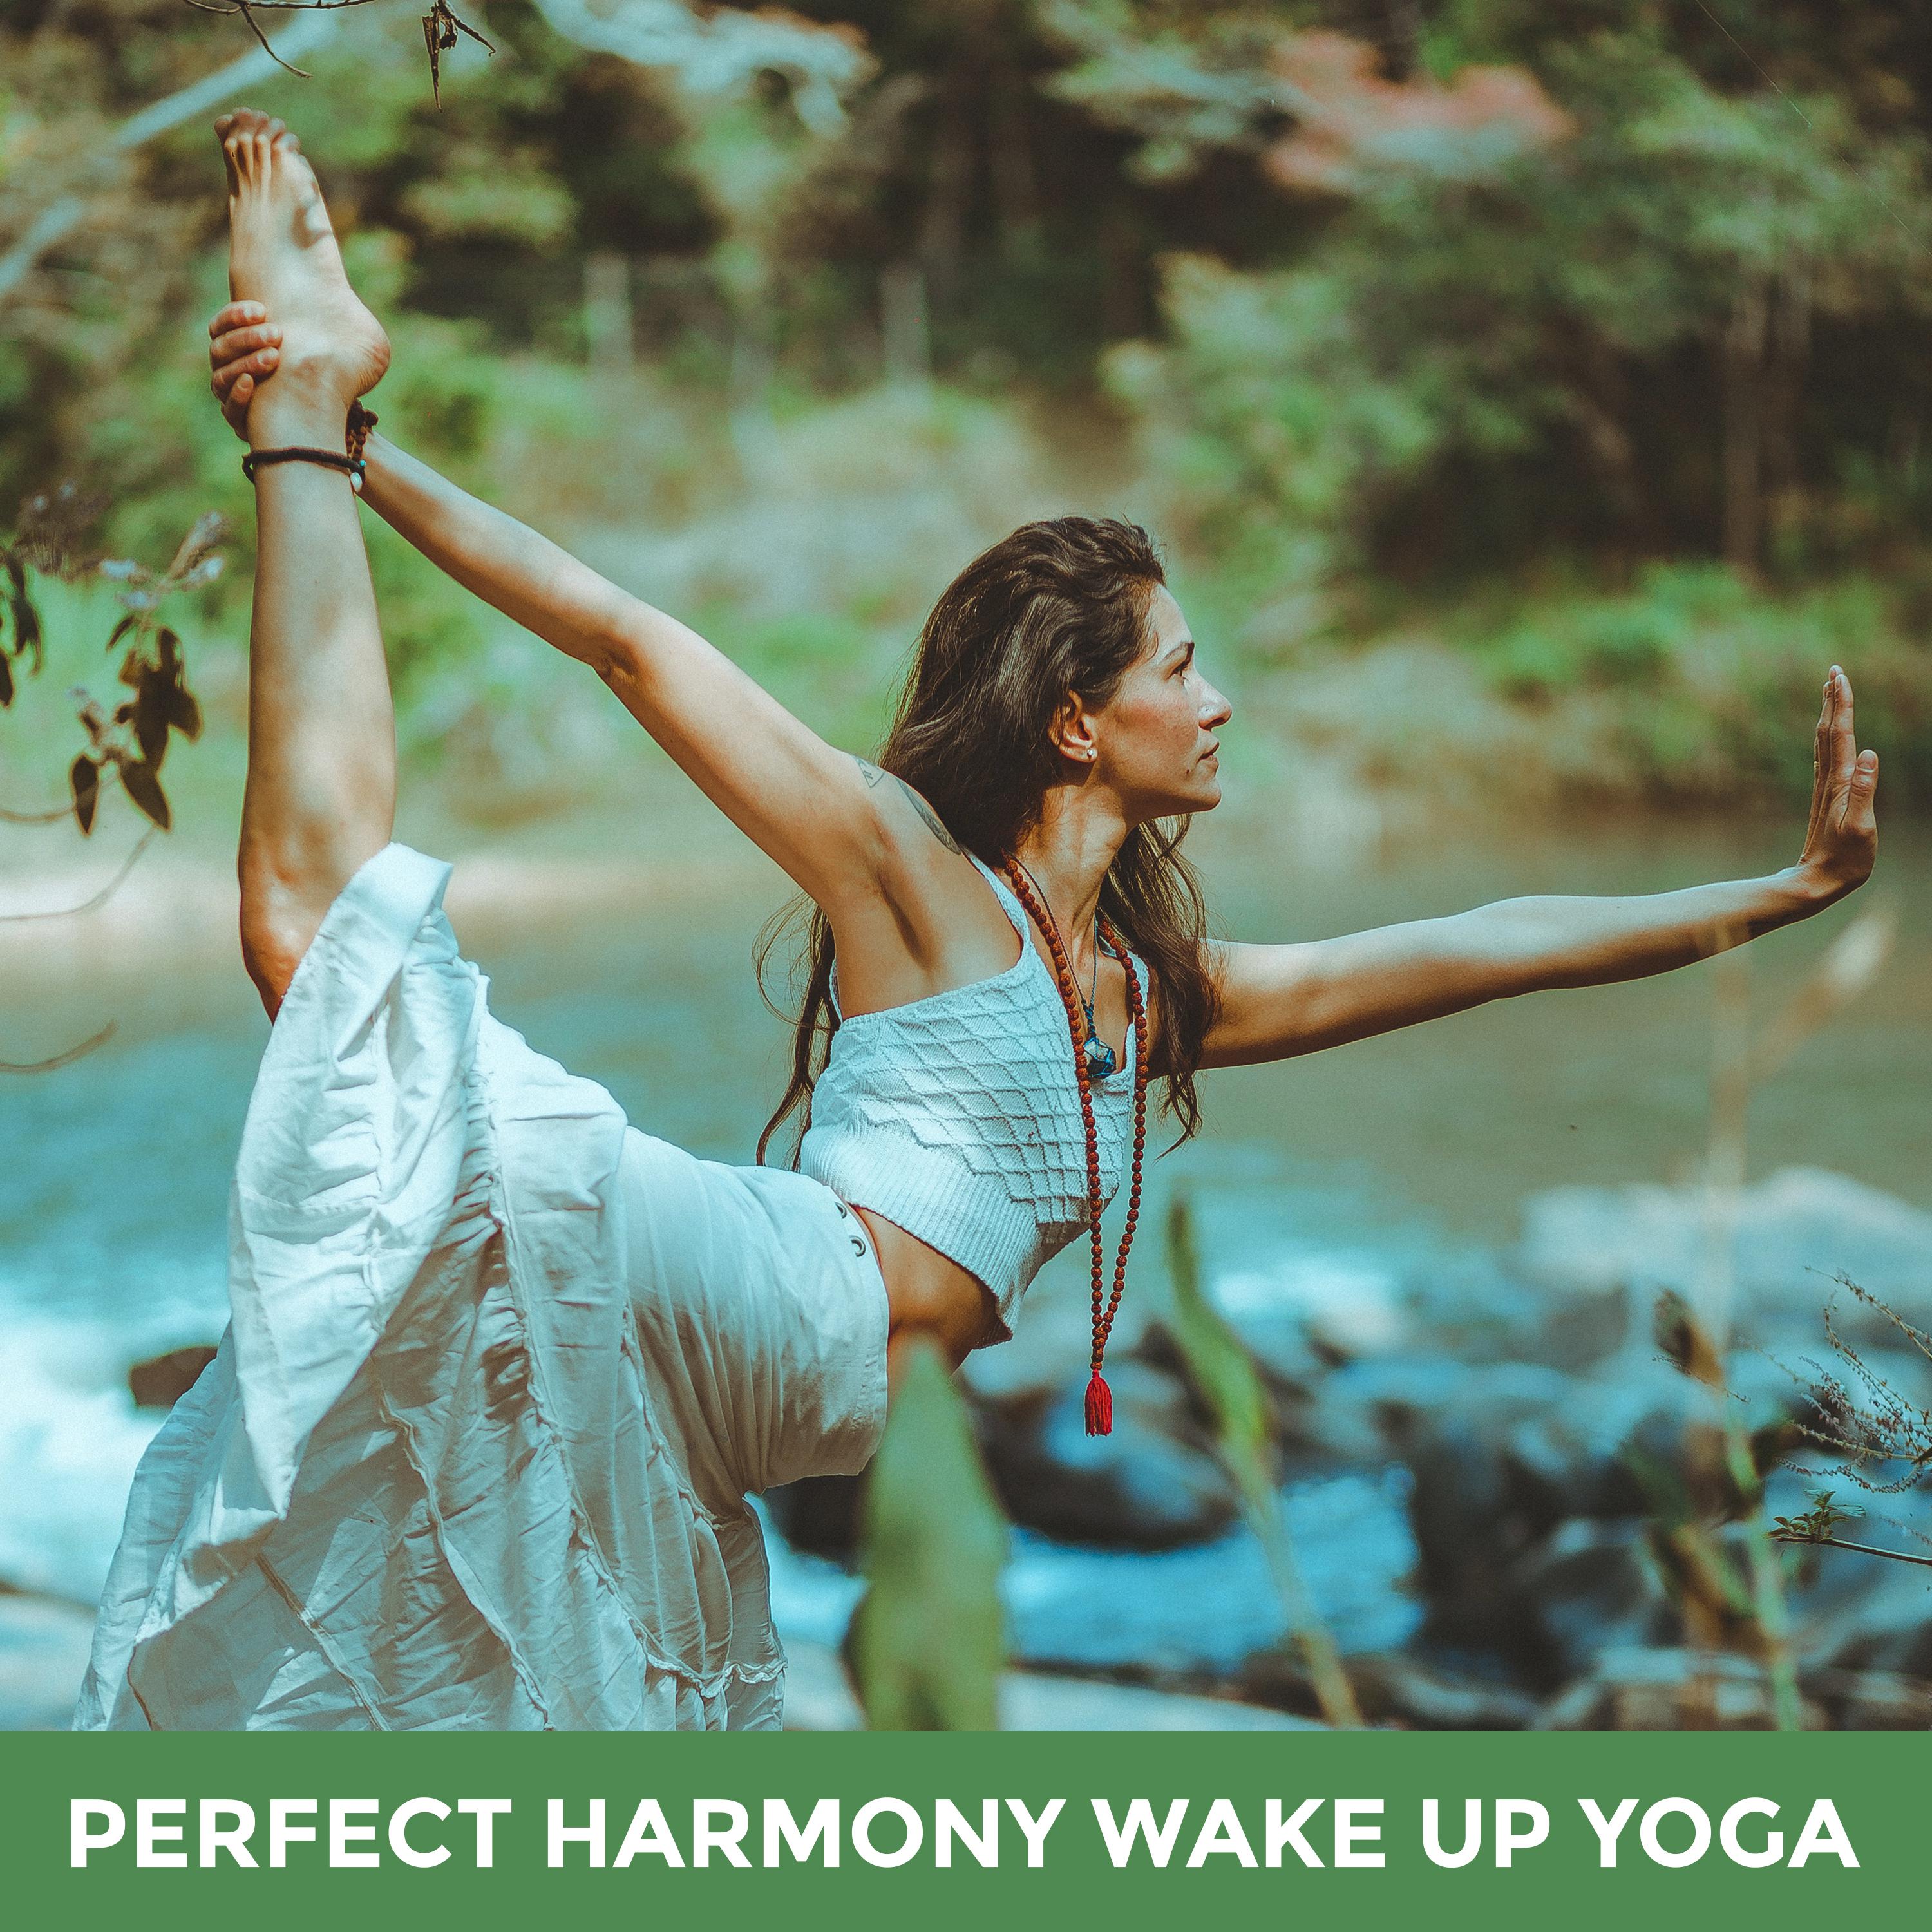 Perfect Harmony Wake Up Yoga: 2019 New Age Deep Ambient Music for Morning Meditation Session, Vital Energy for All Day, Positive Attitude, Chakra Opening